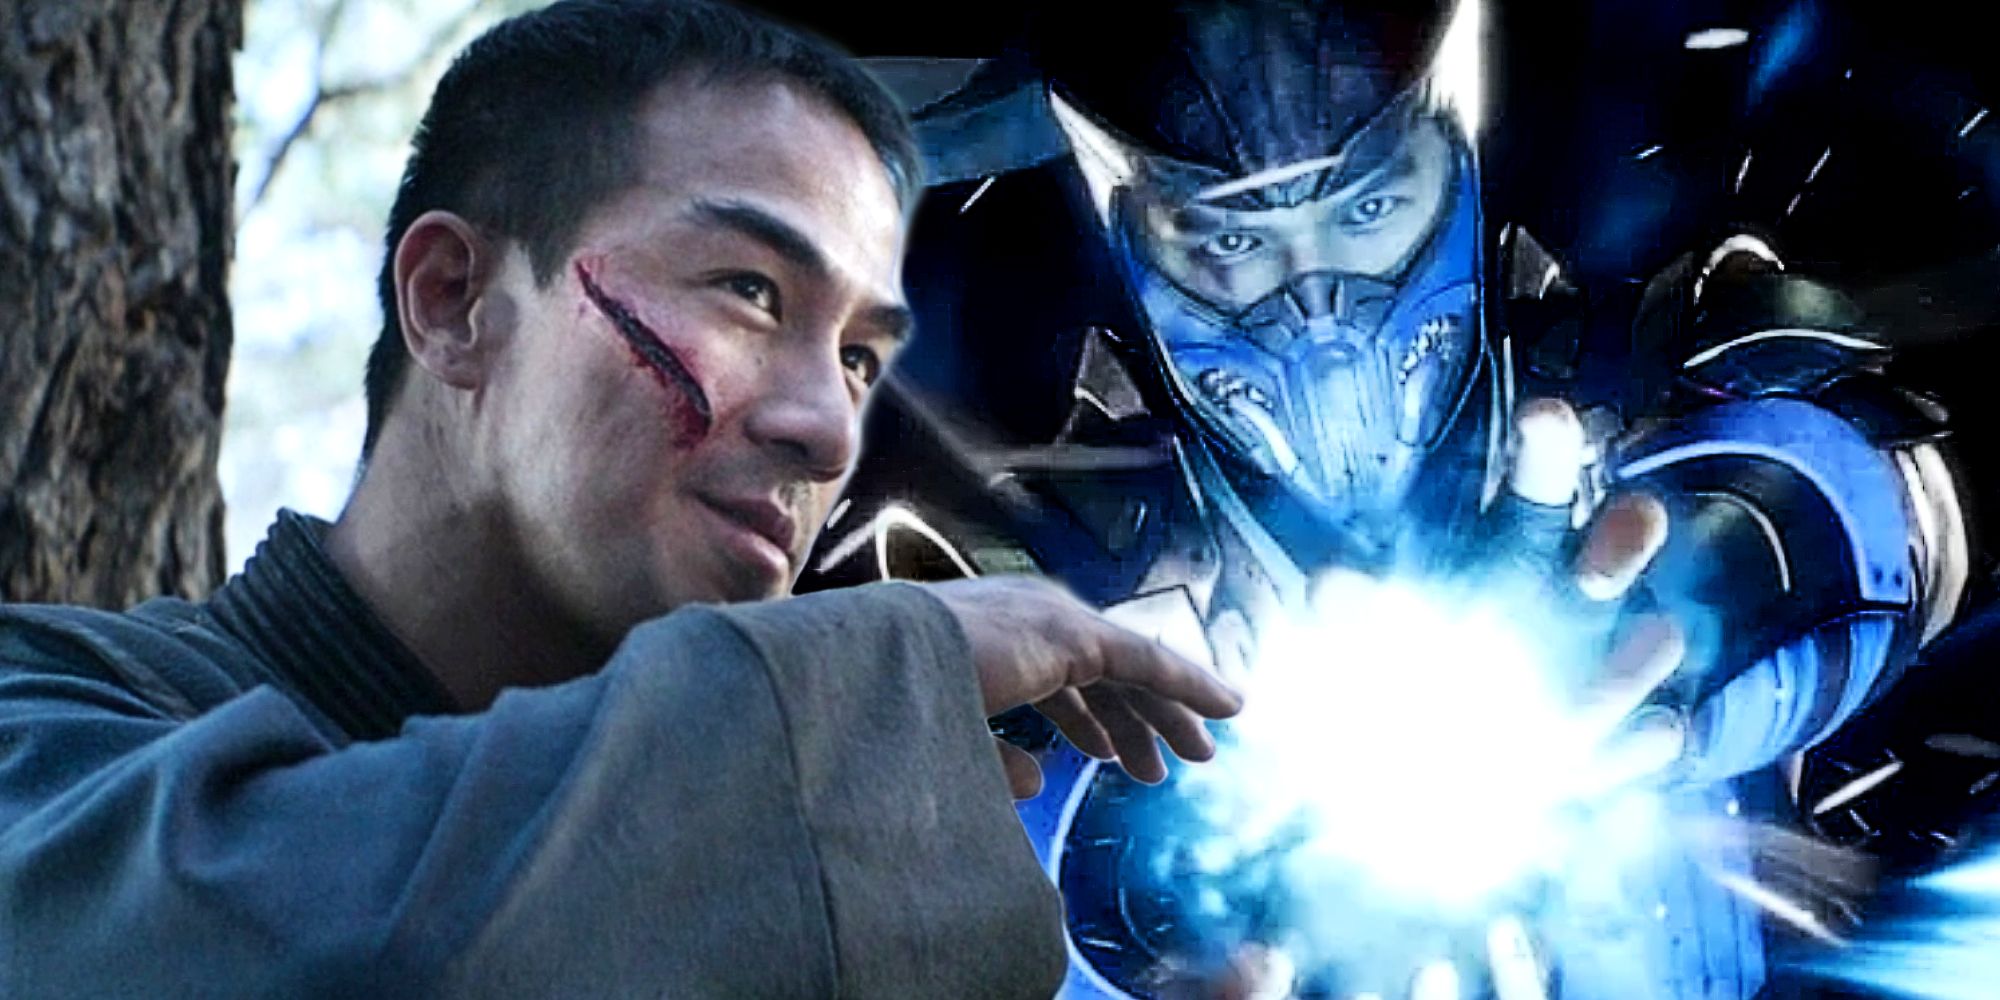 B-Han as Sub-Zero in the Mortal Kombat movies and video games